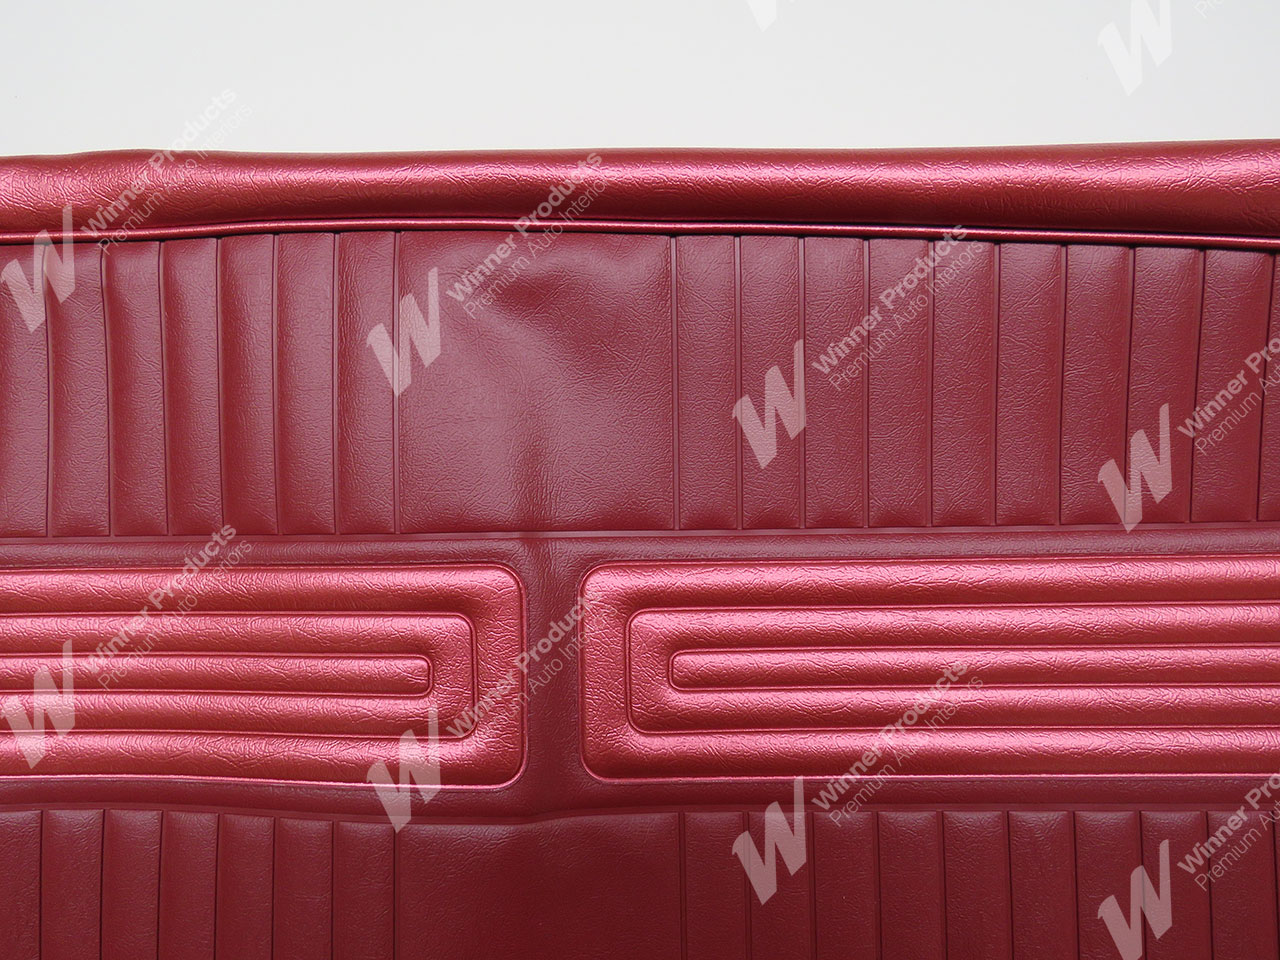 Holden Special HD Special Sedan D54 Bolero & Garnet Red Seat Covers (Image 4 of 4)